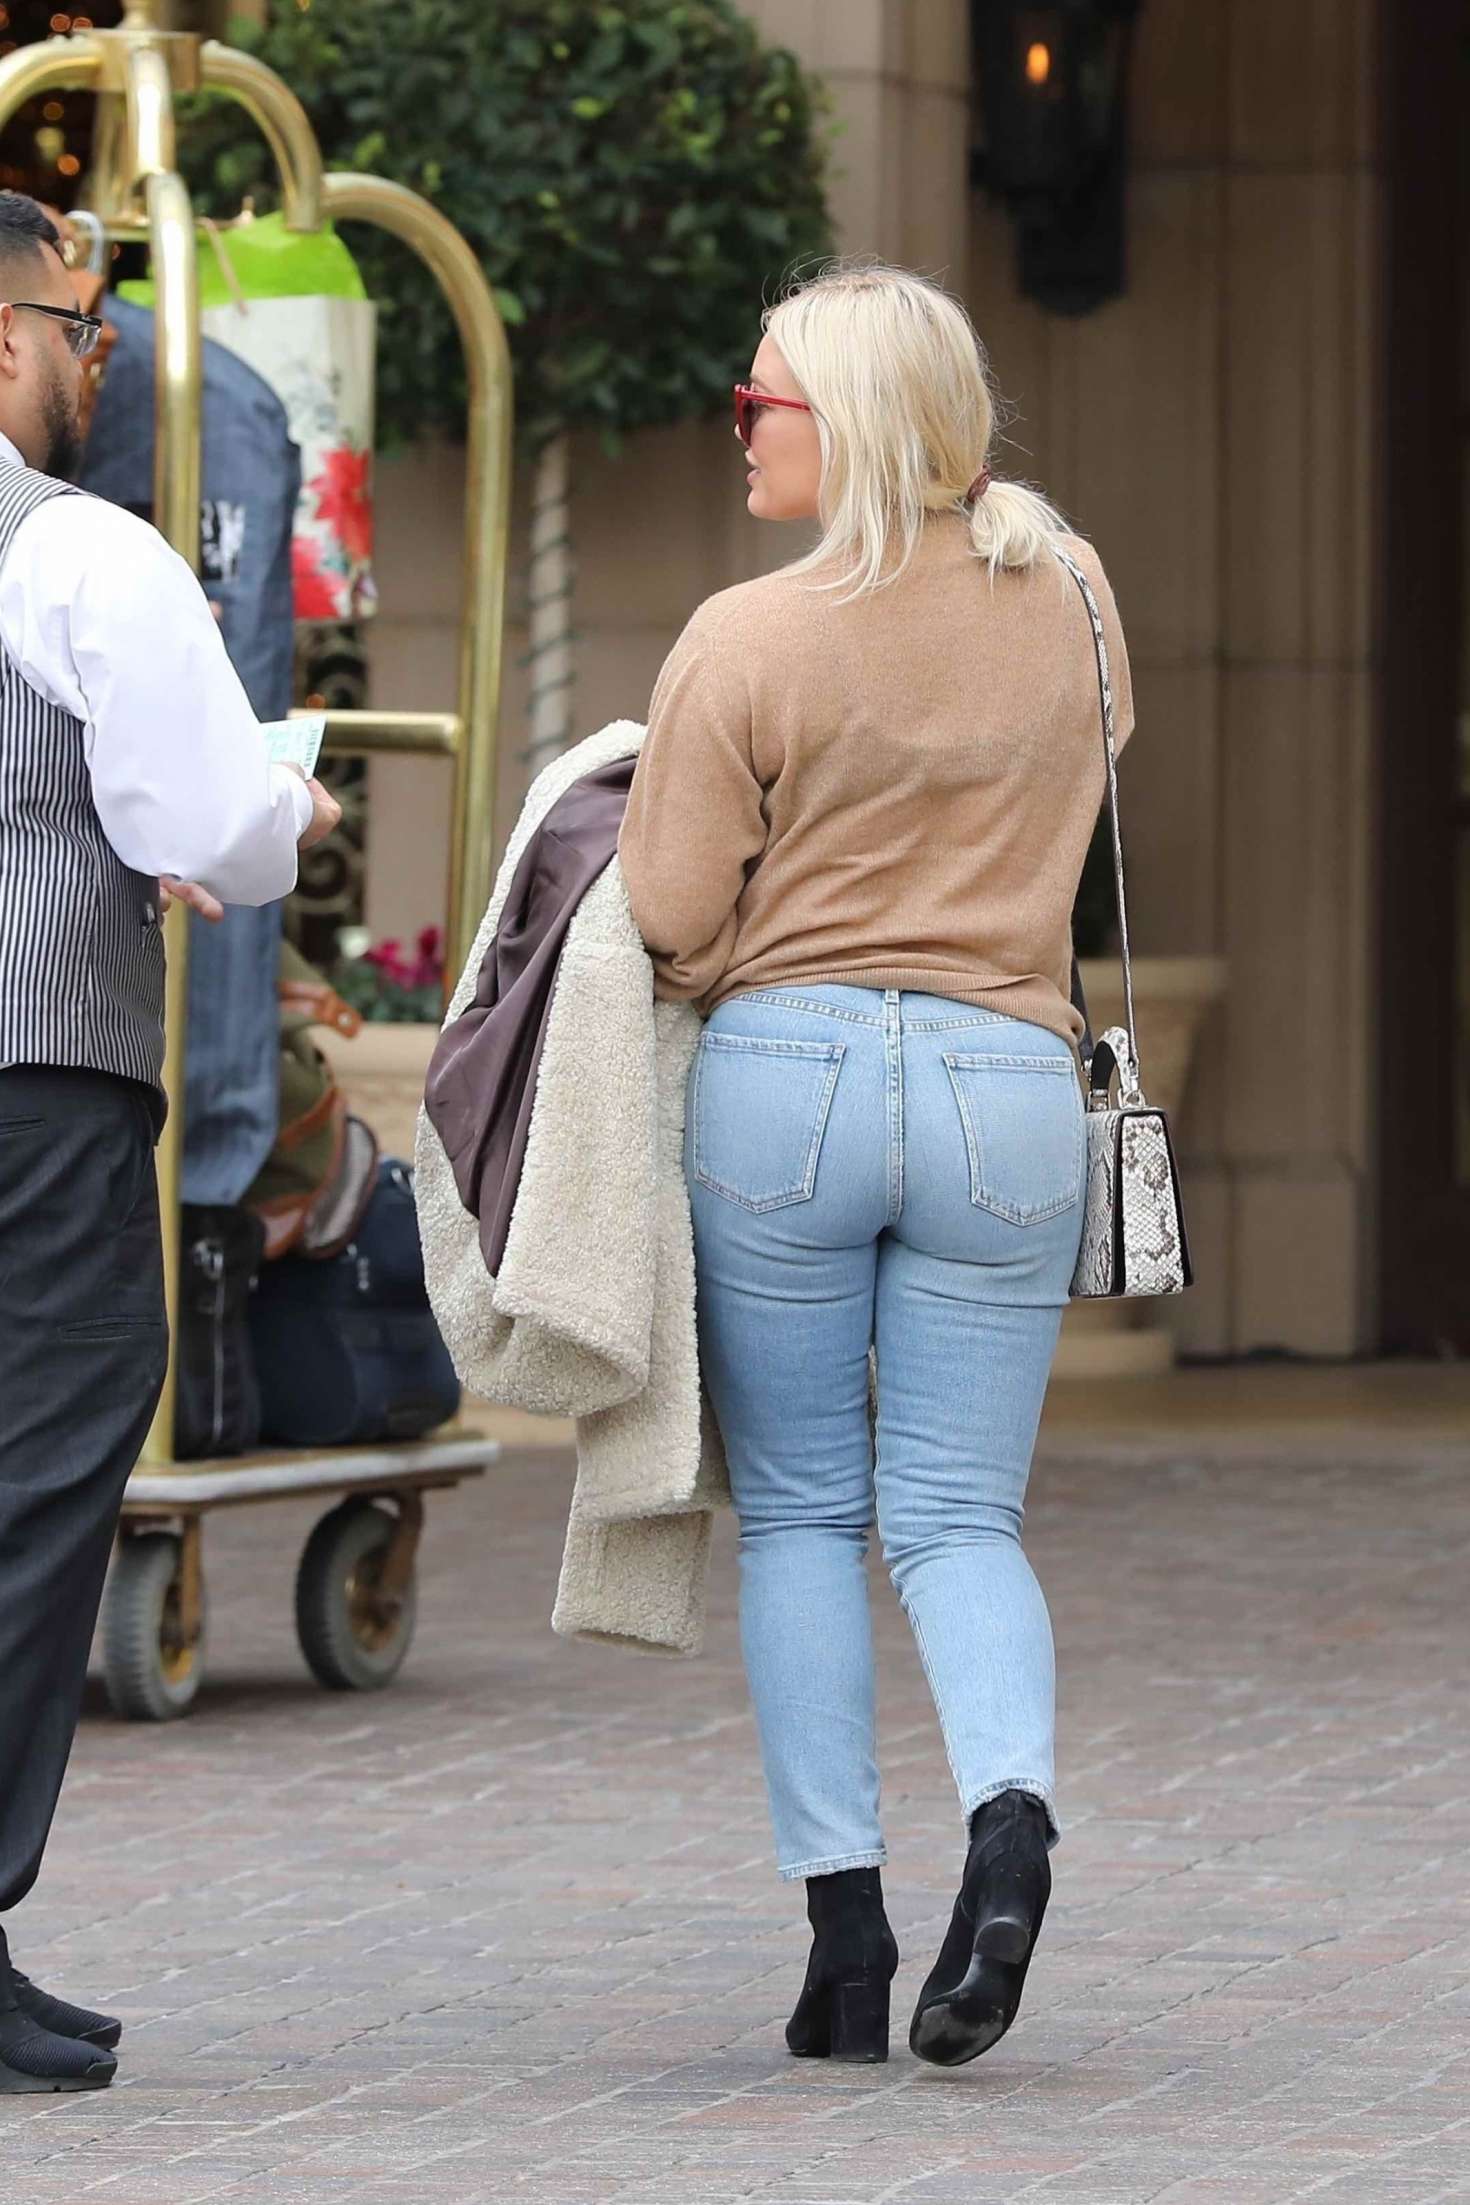 Hilary Duff in Tight Jeans out in Beverly Hills. 